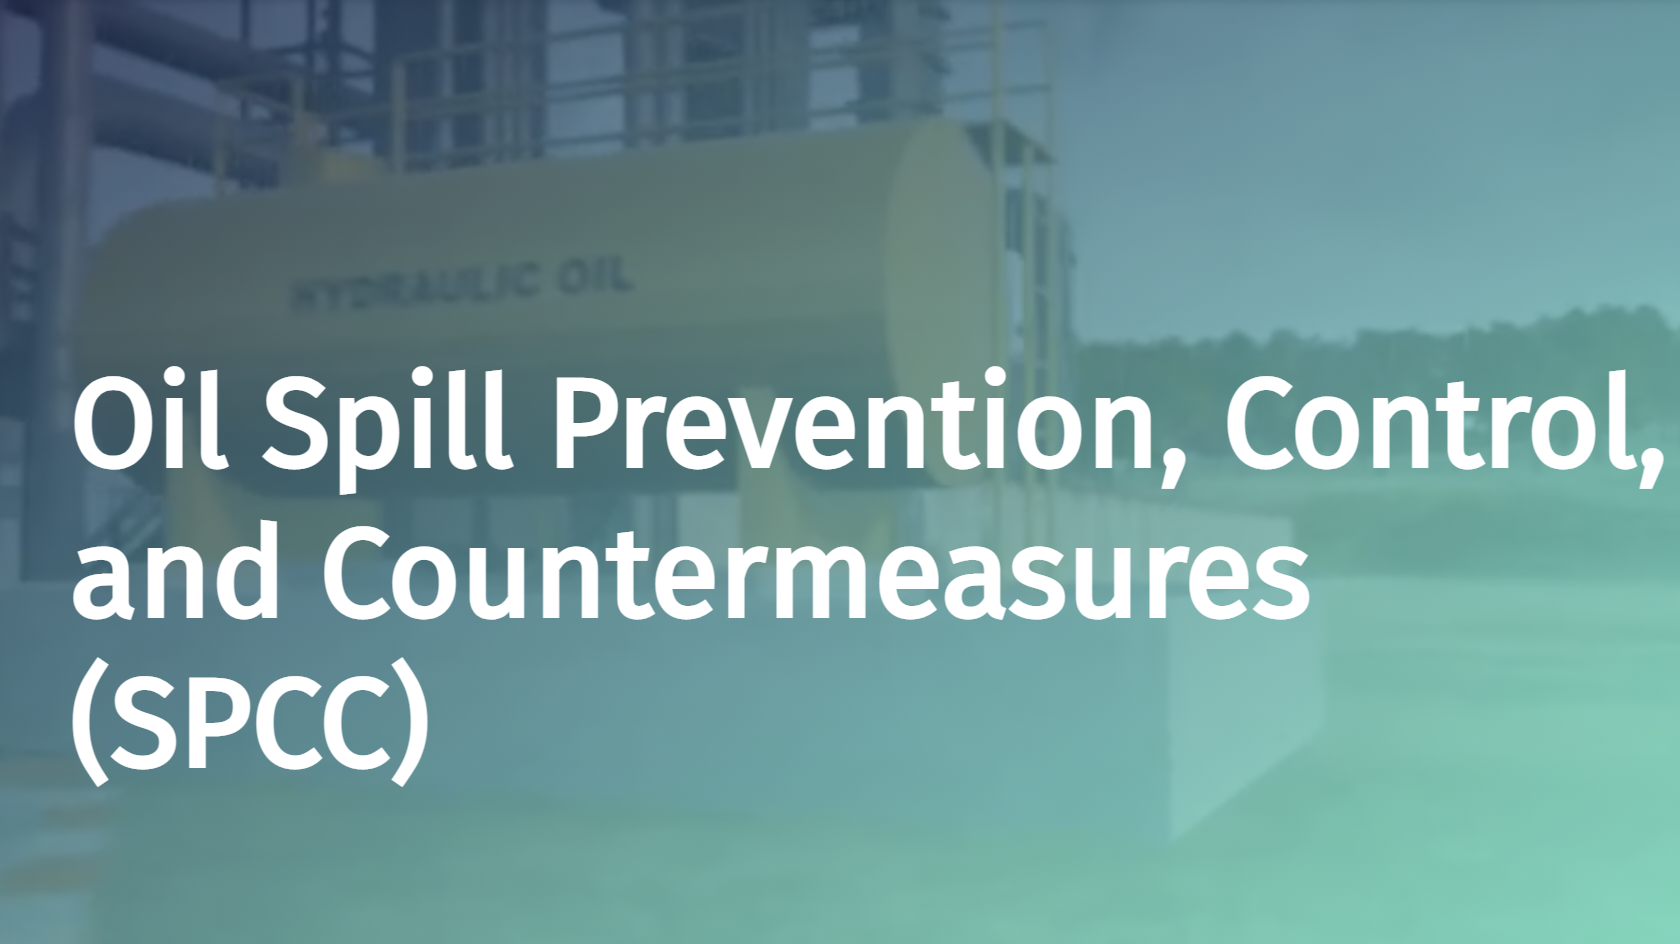 Oil Spill Prevention, Control, and Countermeasures (SPCC)